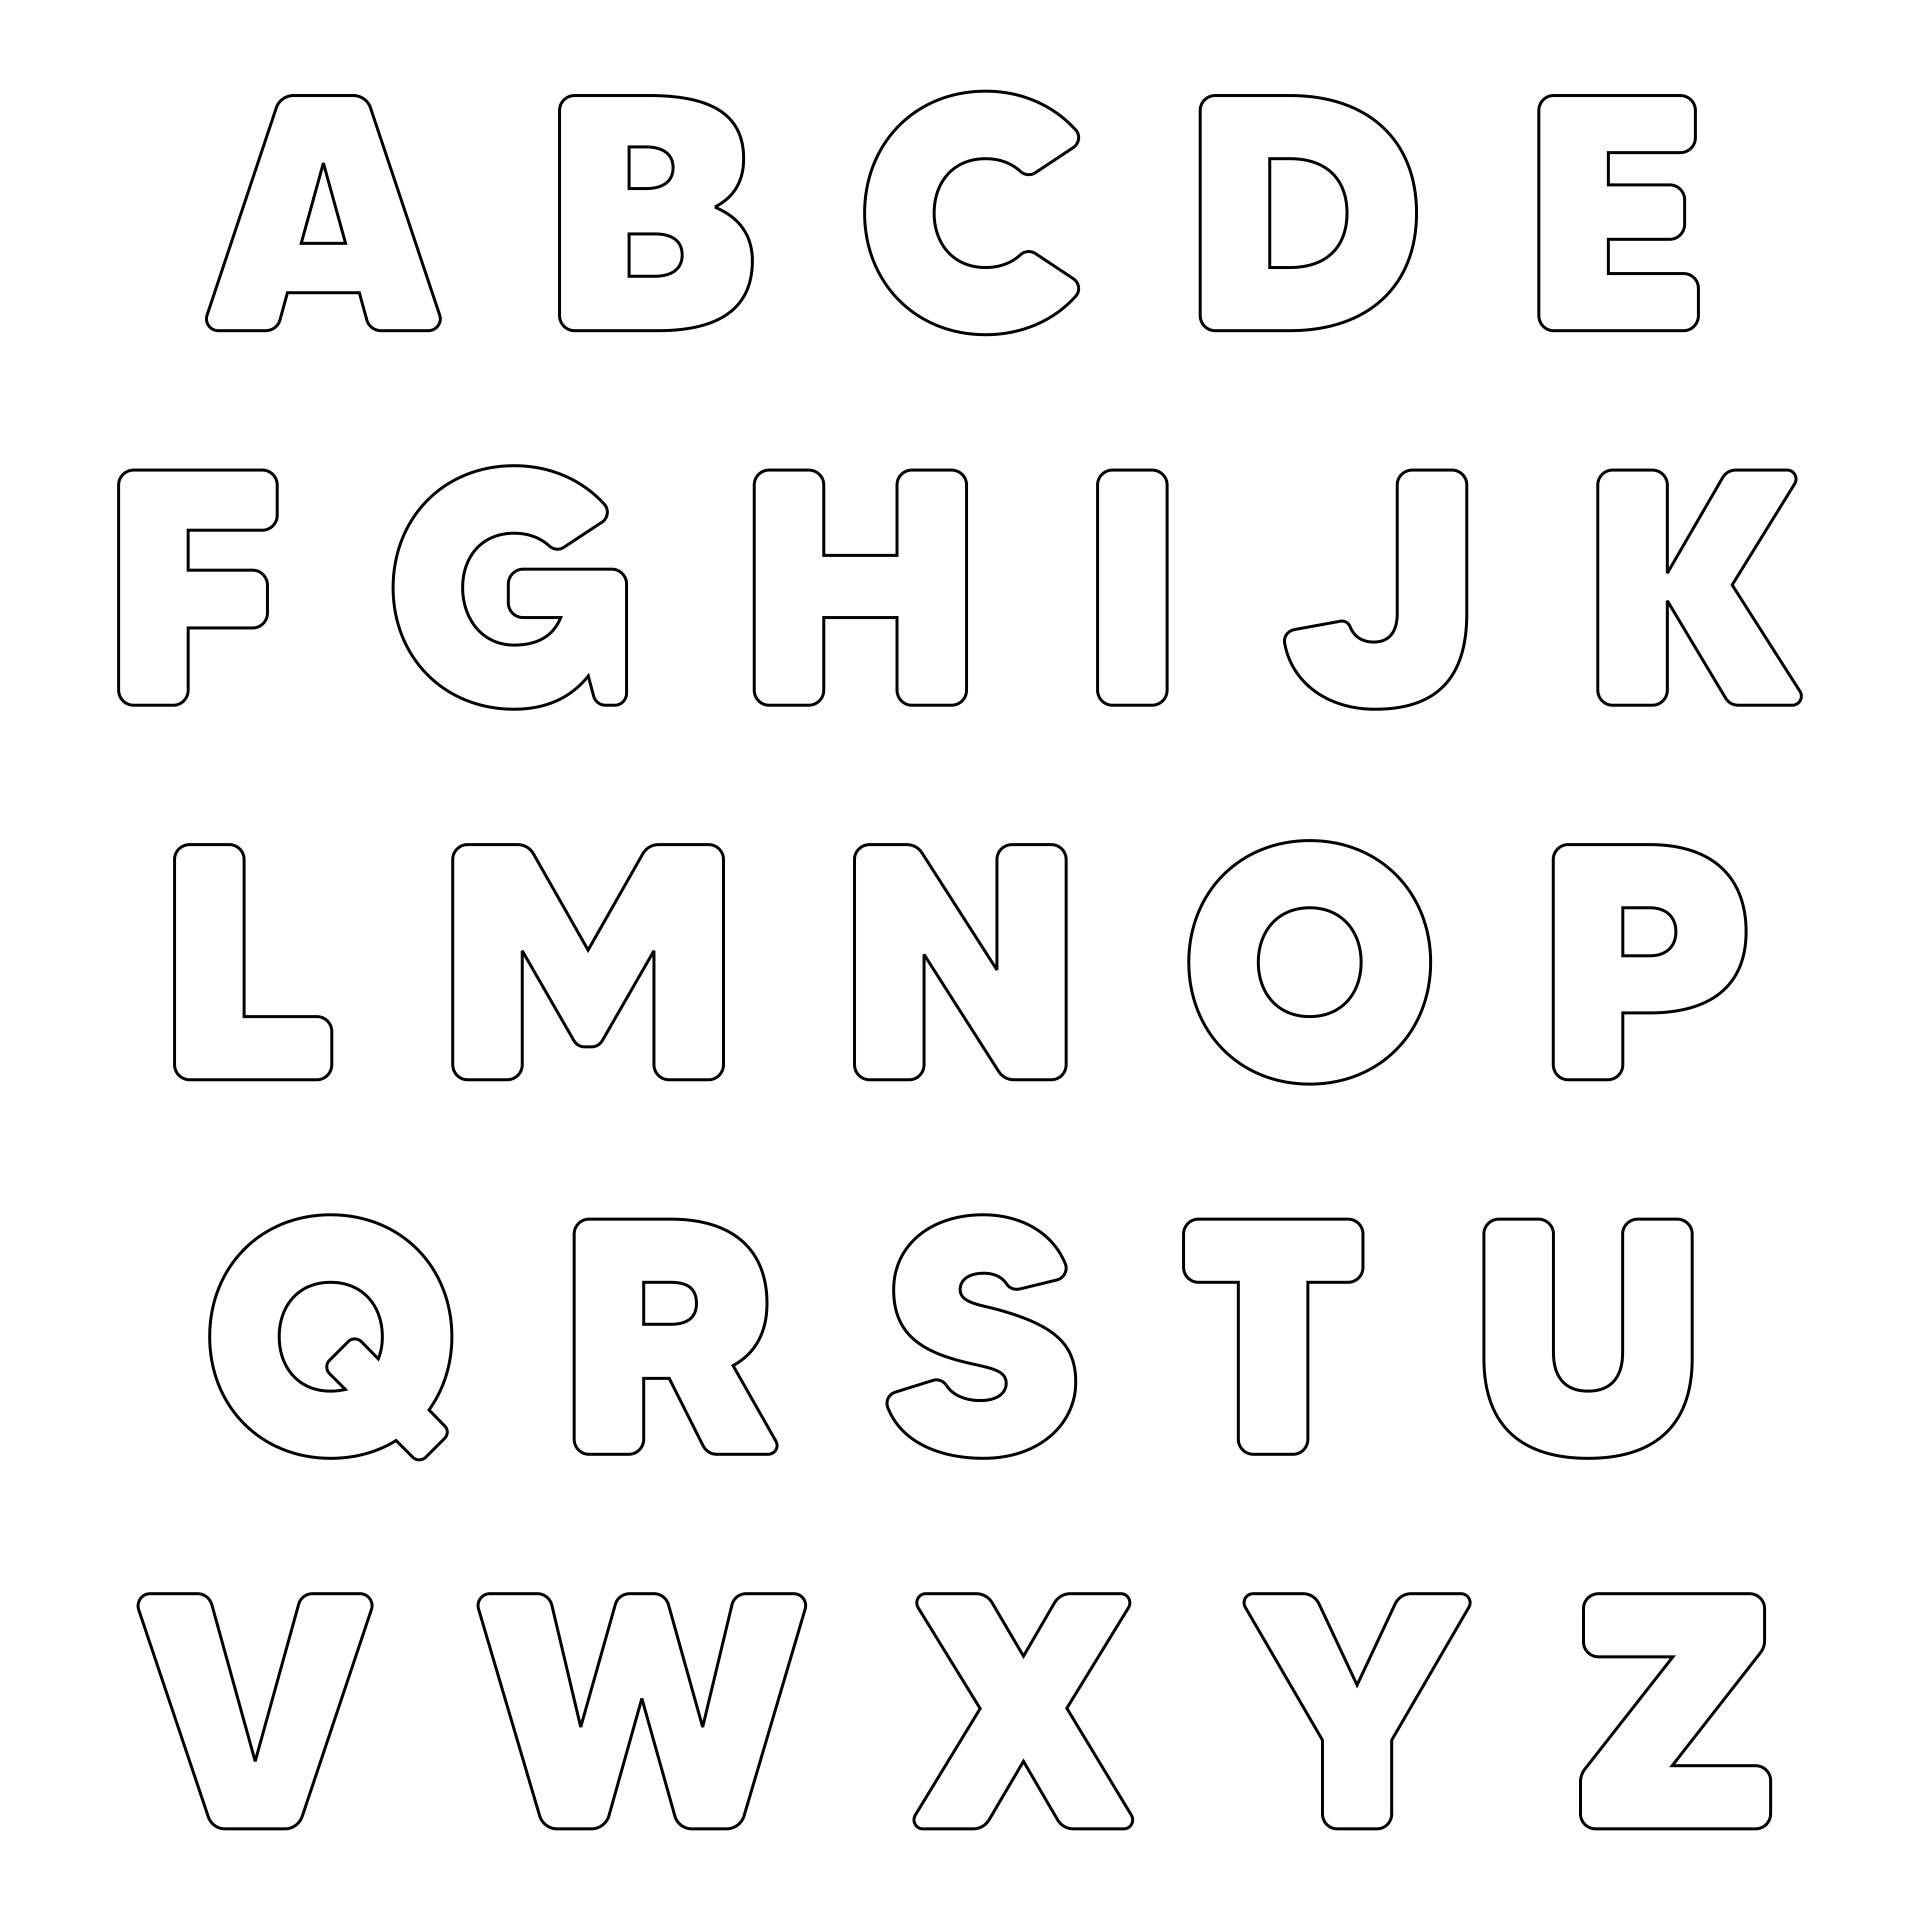 6 Best Images Of Printable Alphabet Letters To Cut Small Alphabet Letters Printable PDF 